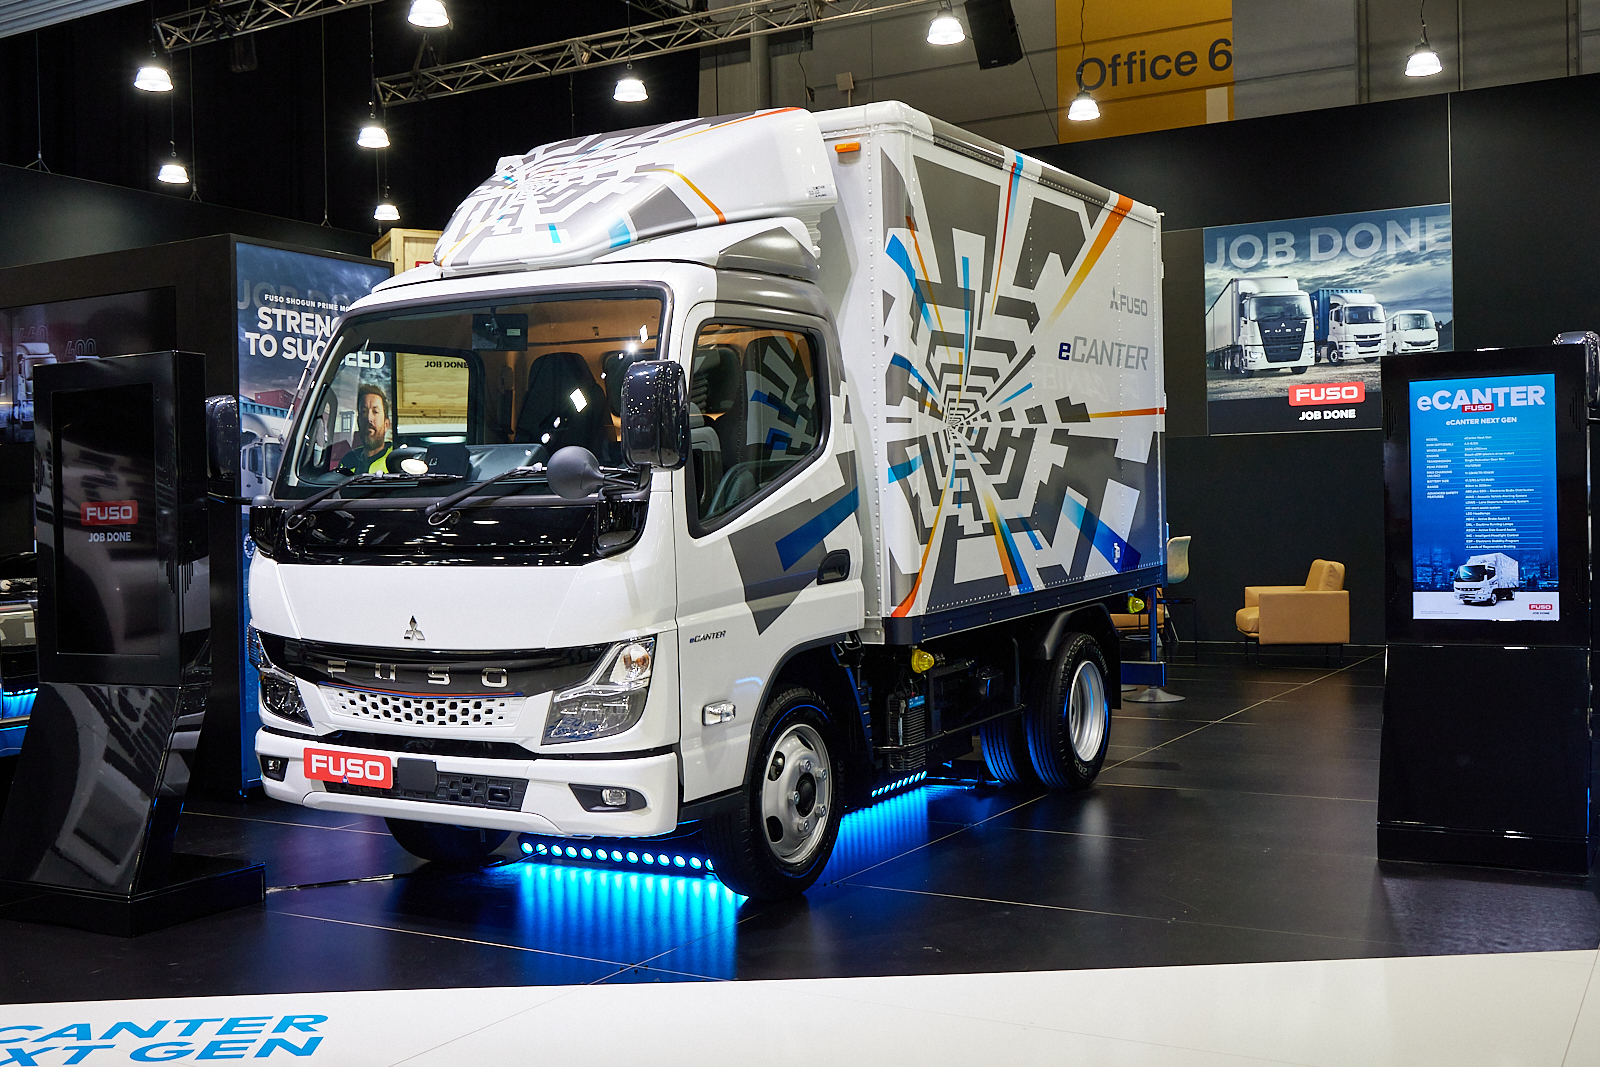 The new eCanter makes its first appearance in Australia at the Brisbane Truck Show